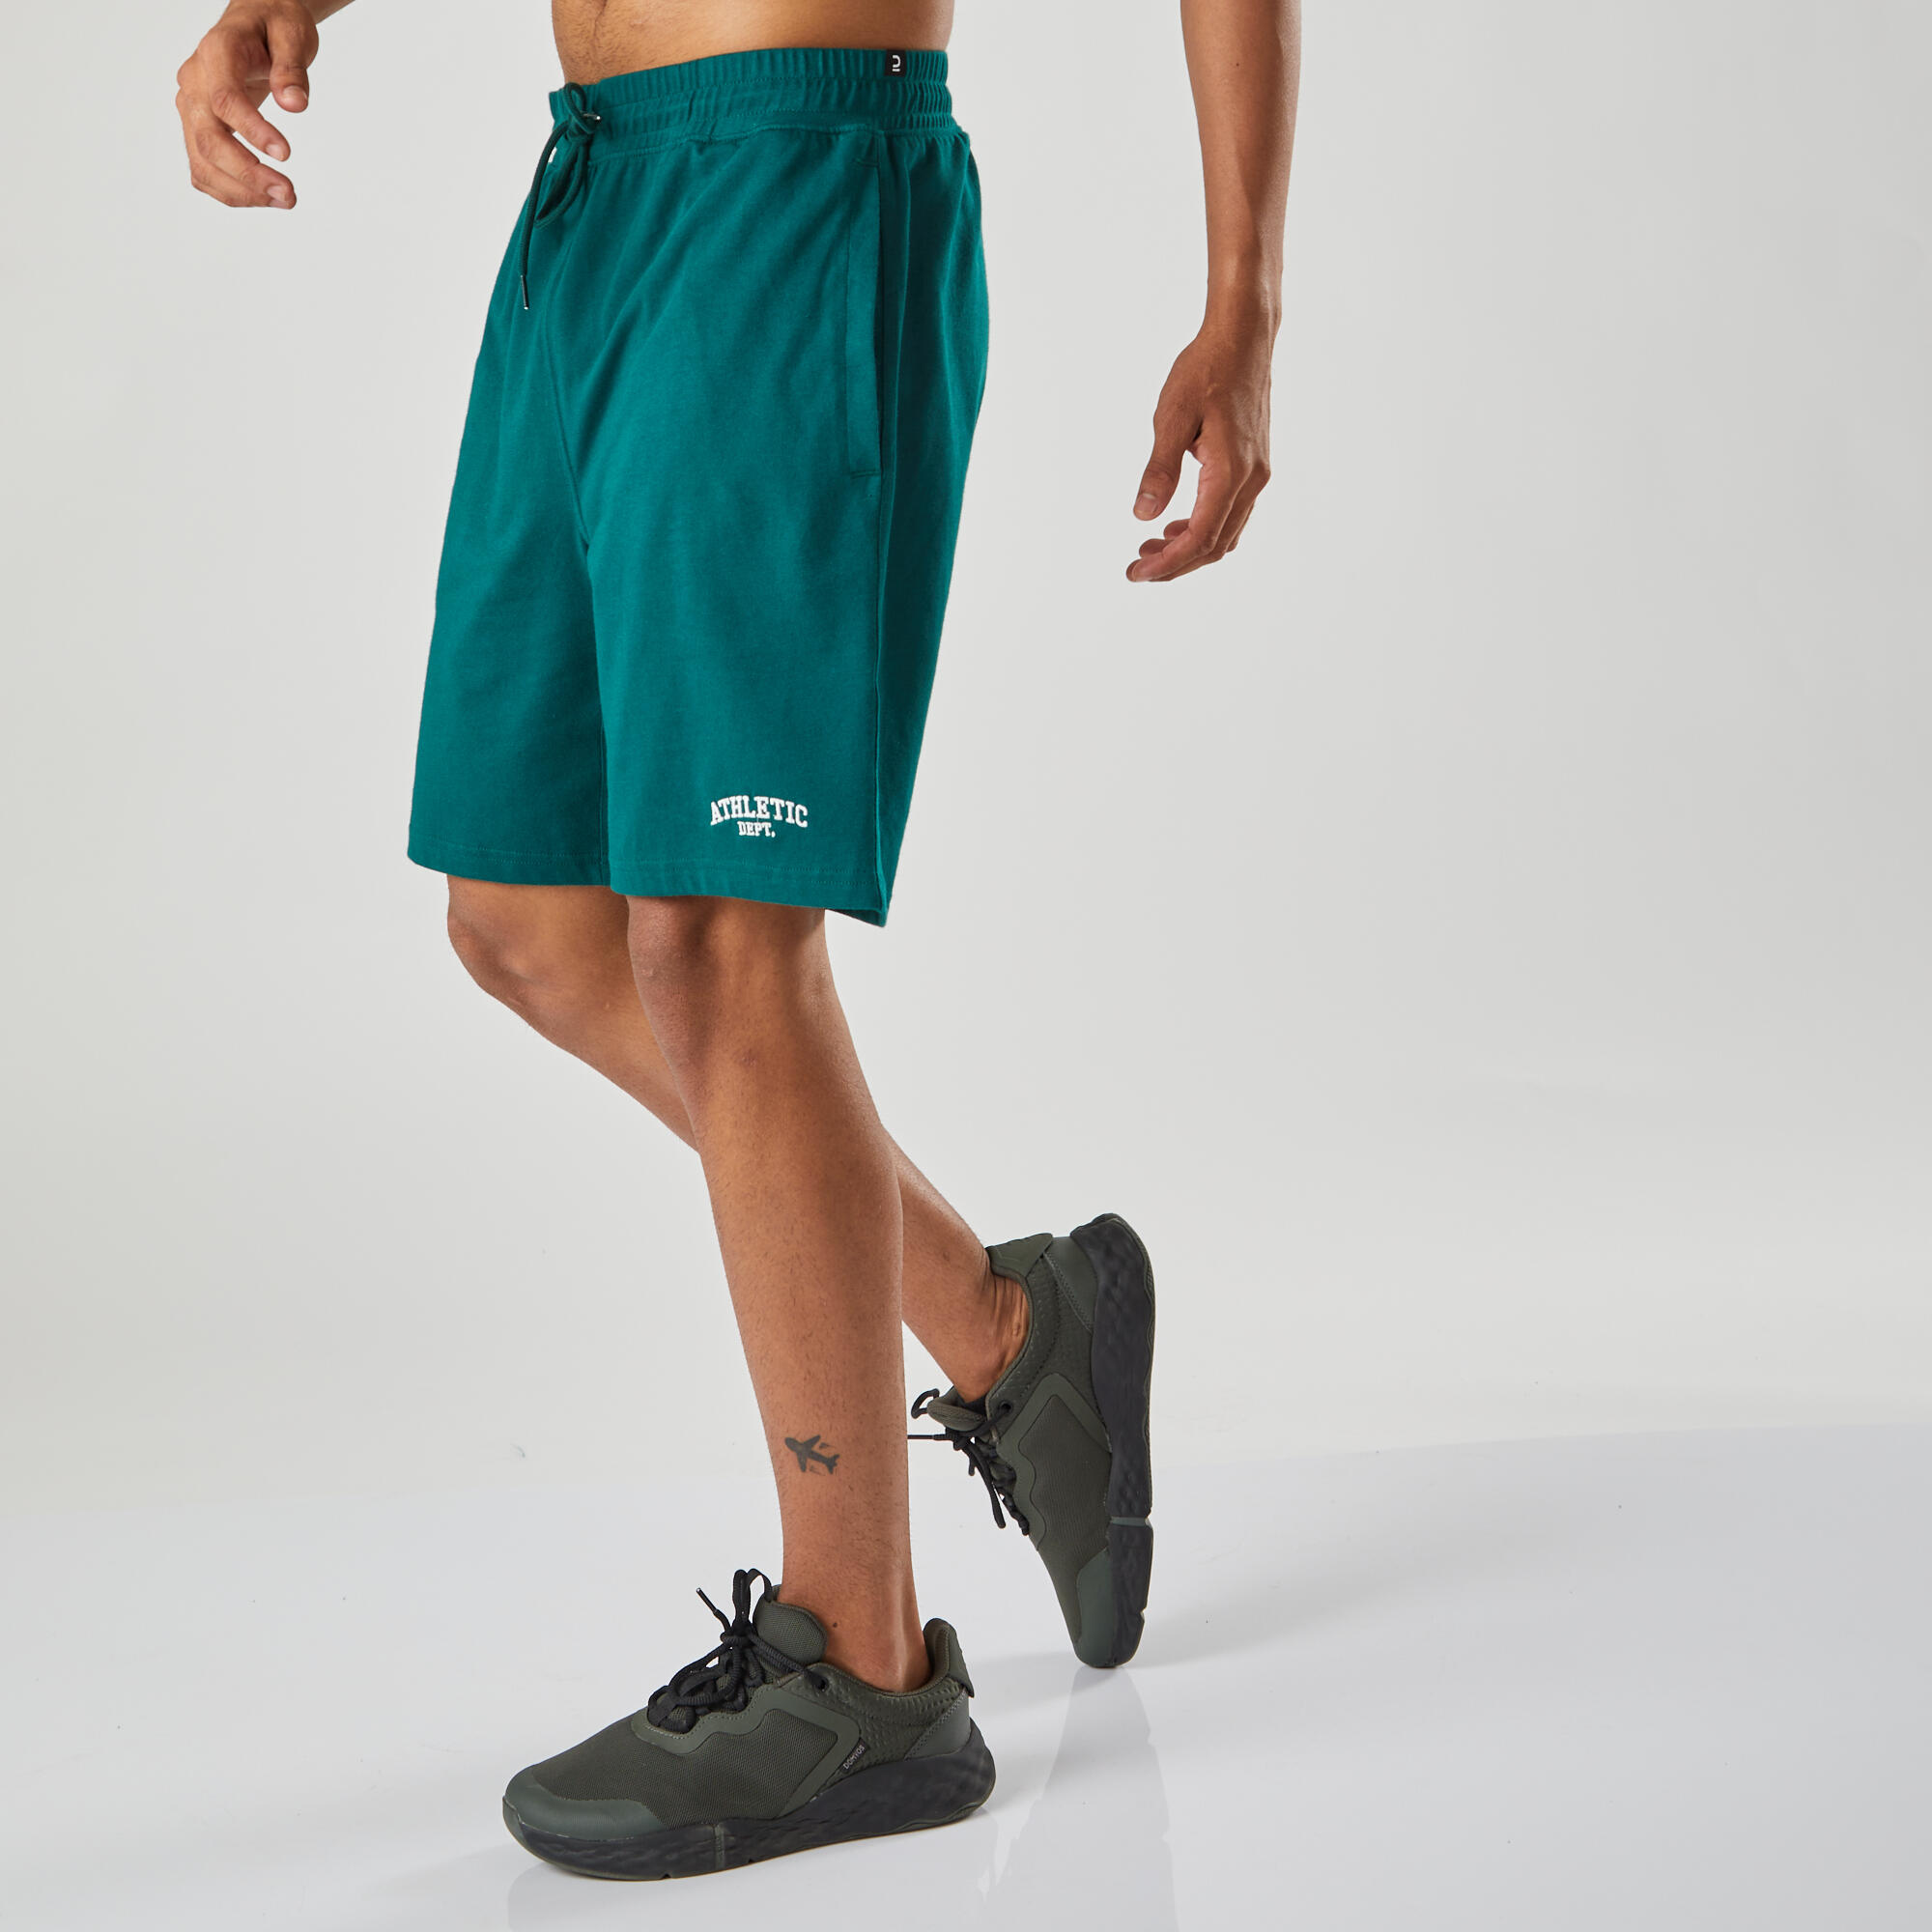 Men's Straight-Leg Cotton Fitness Shorts with Pocket - Green